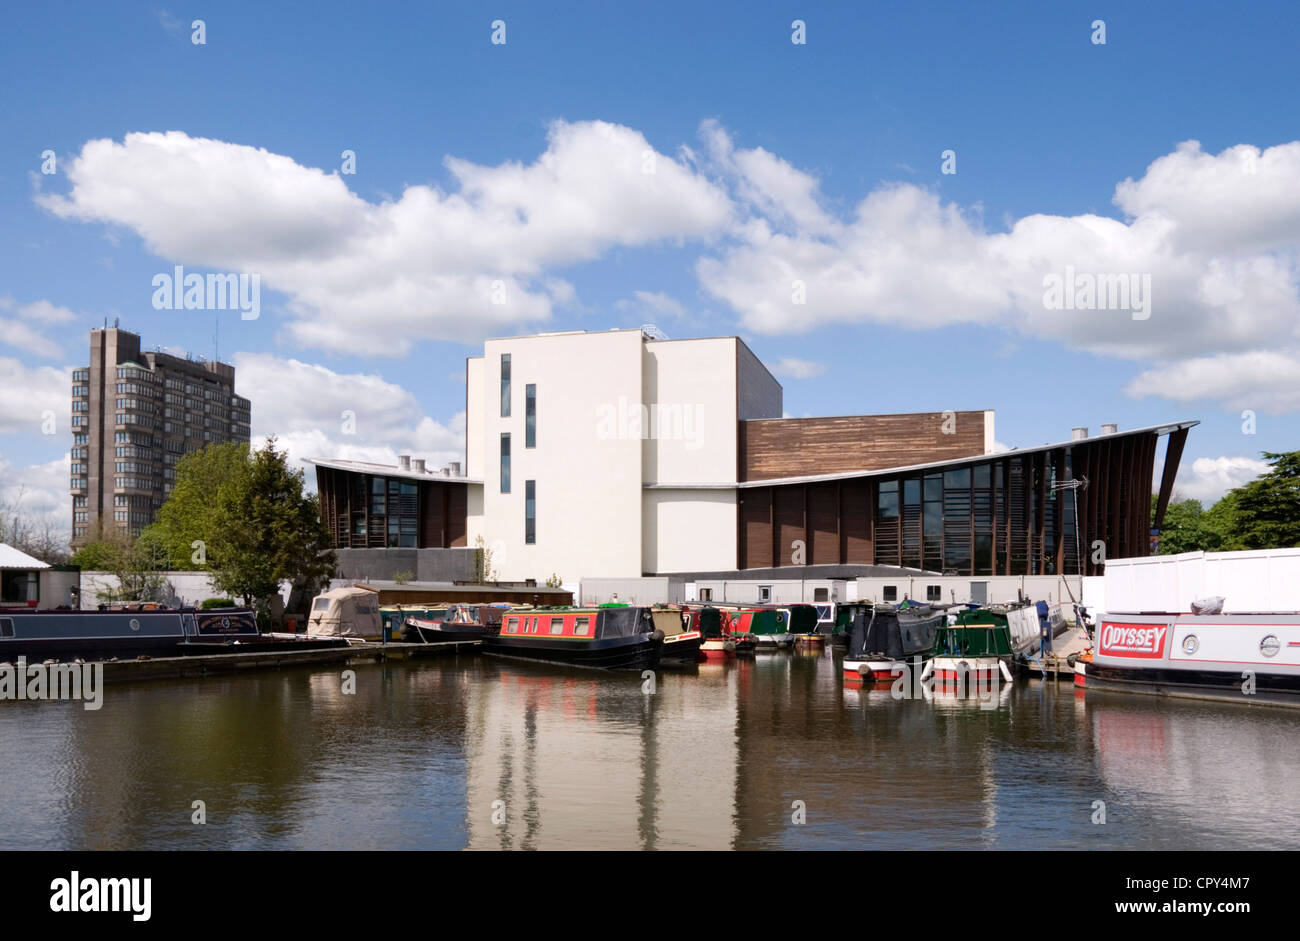 Bucks Aylesbury - Aylesbury Arm GUC - canal basin - moored boats - backdrop of Waterside theatre and County Offices tower - sun Stock Photo